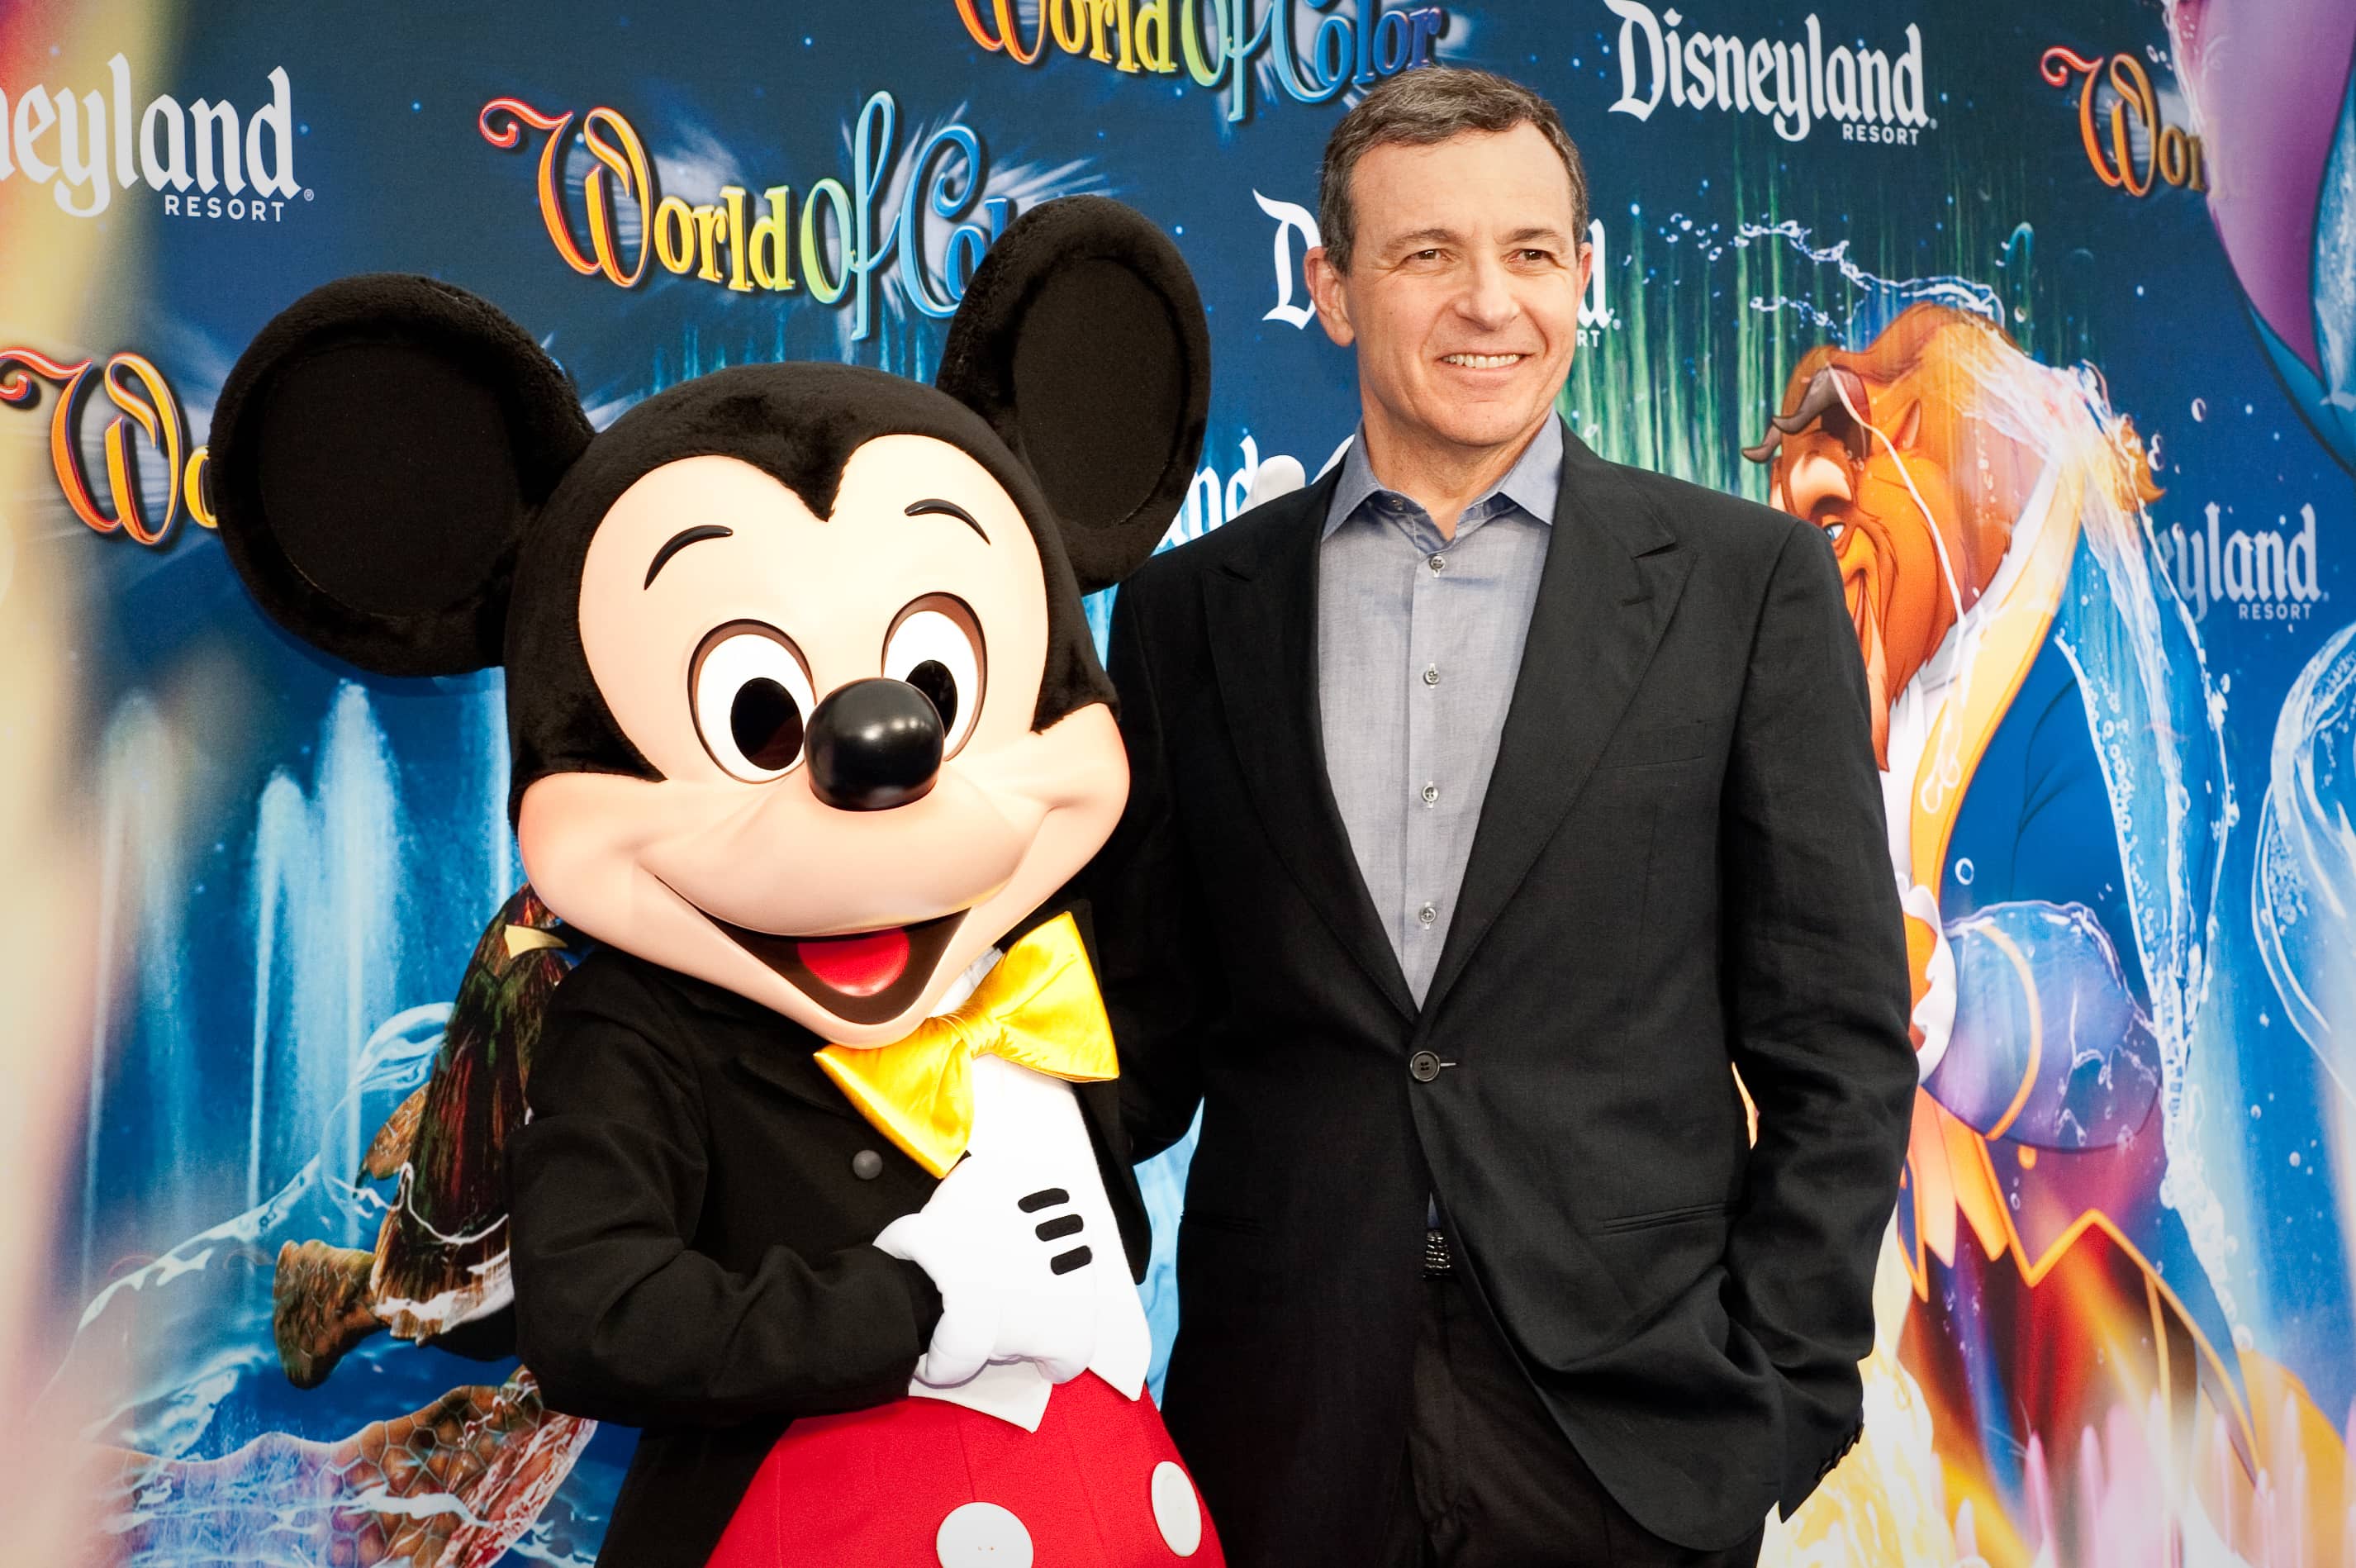 With Apple TV+ ready to compete against Disney+, Bob Iger resigns from the Apple board.